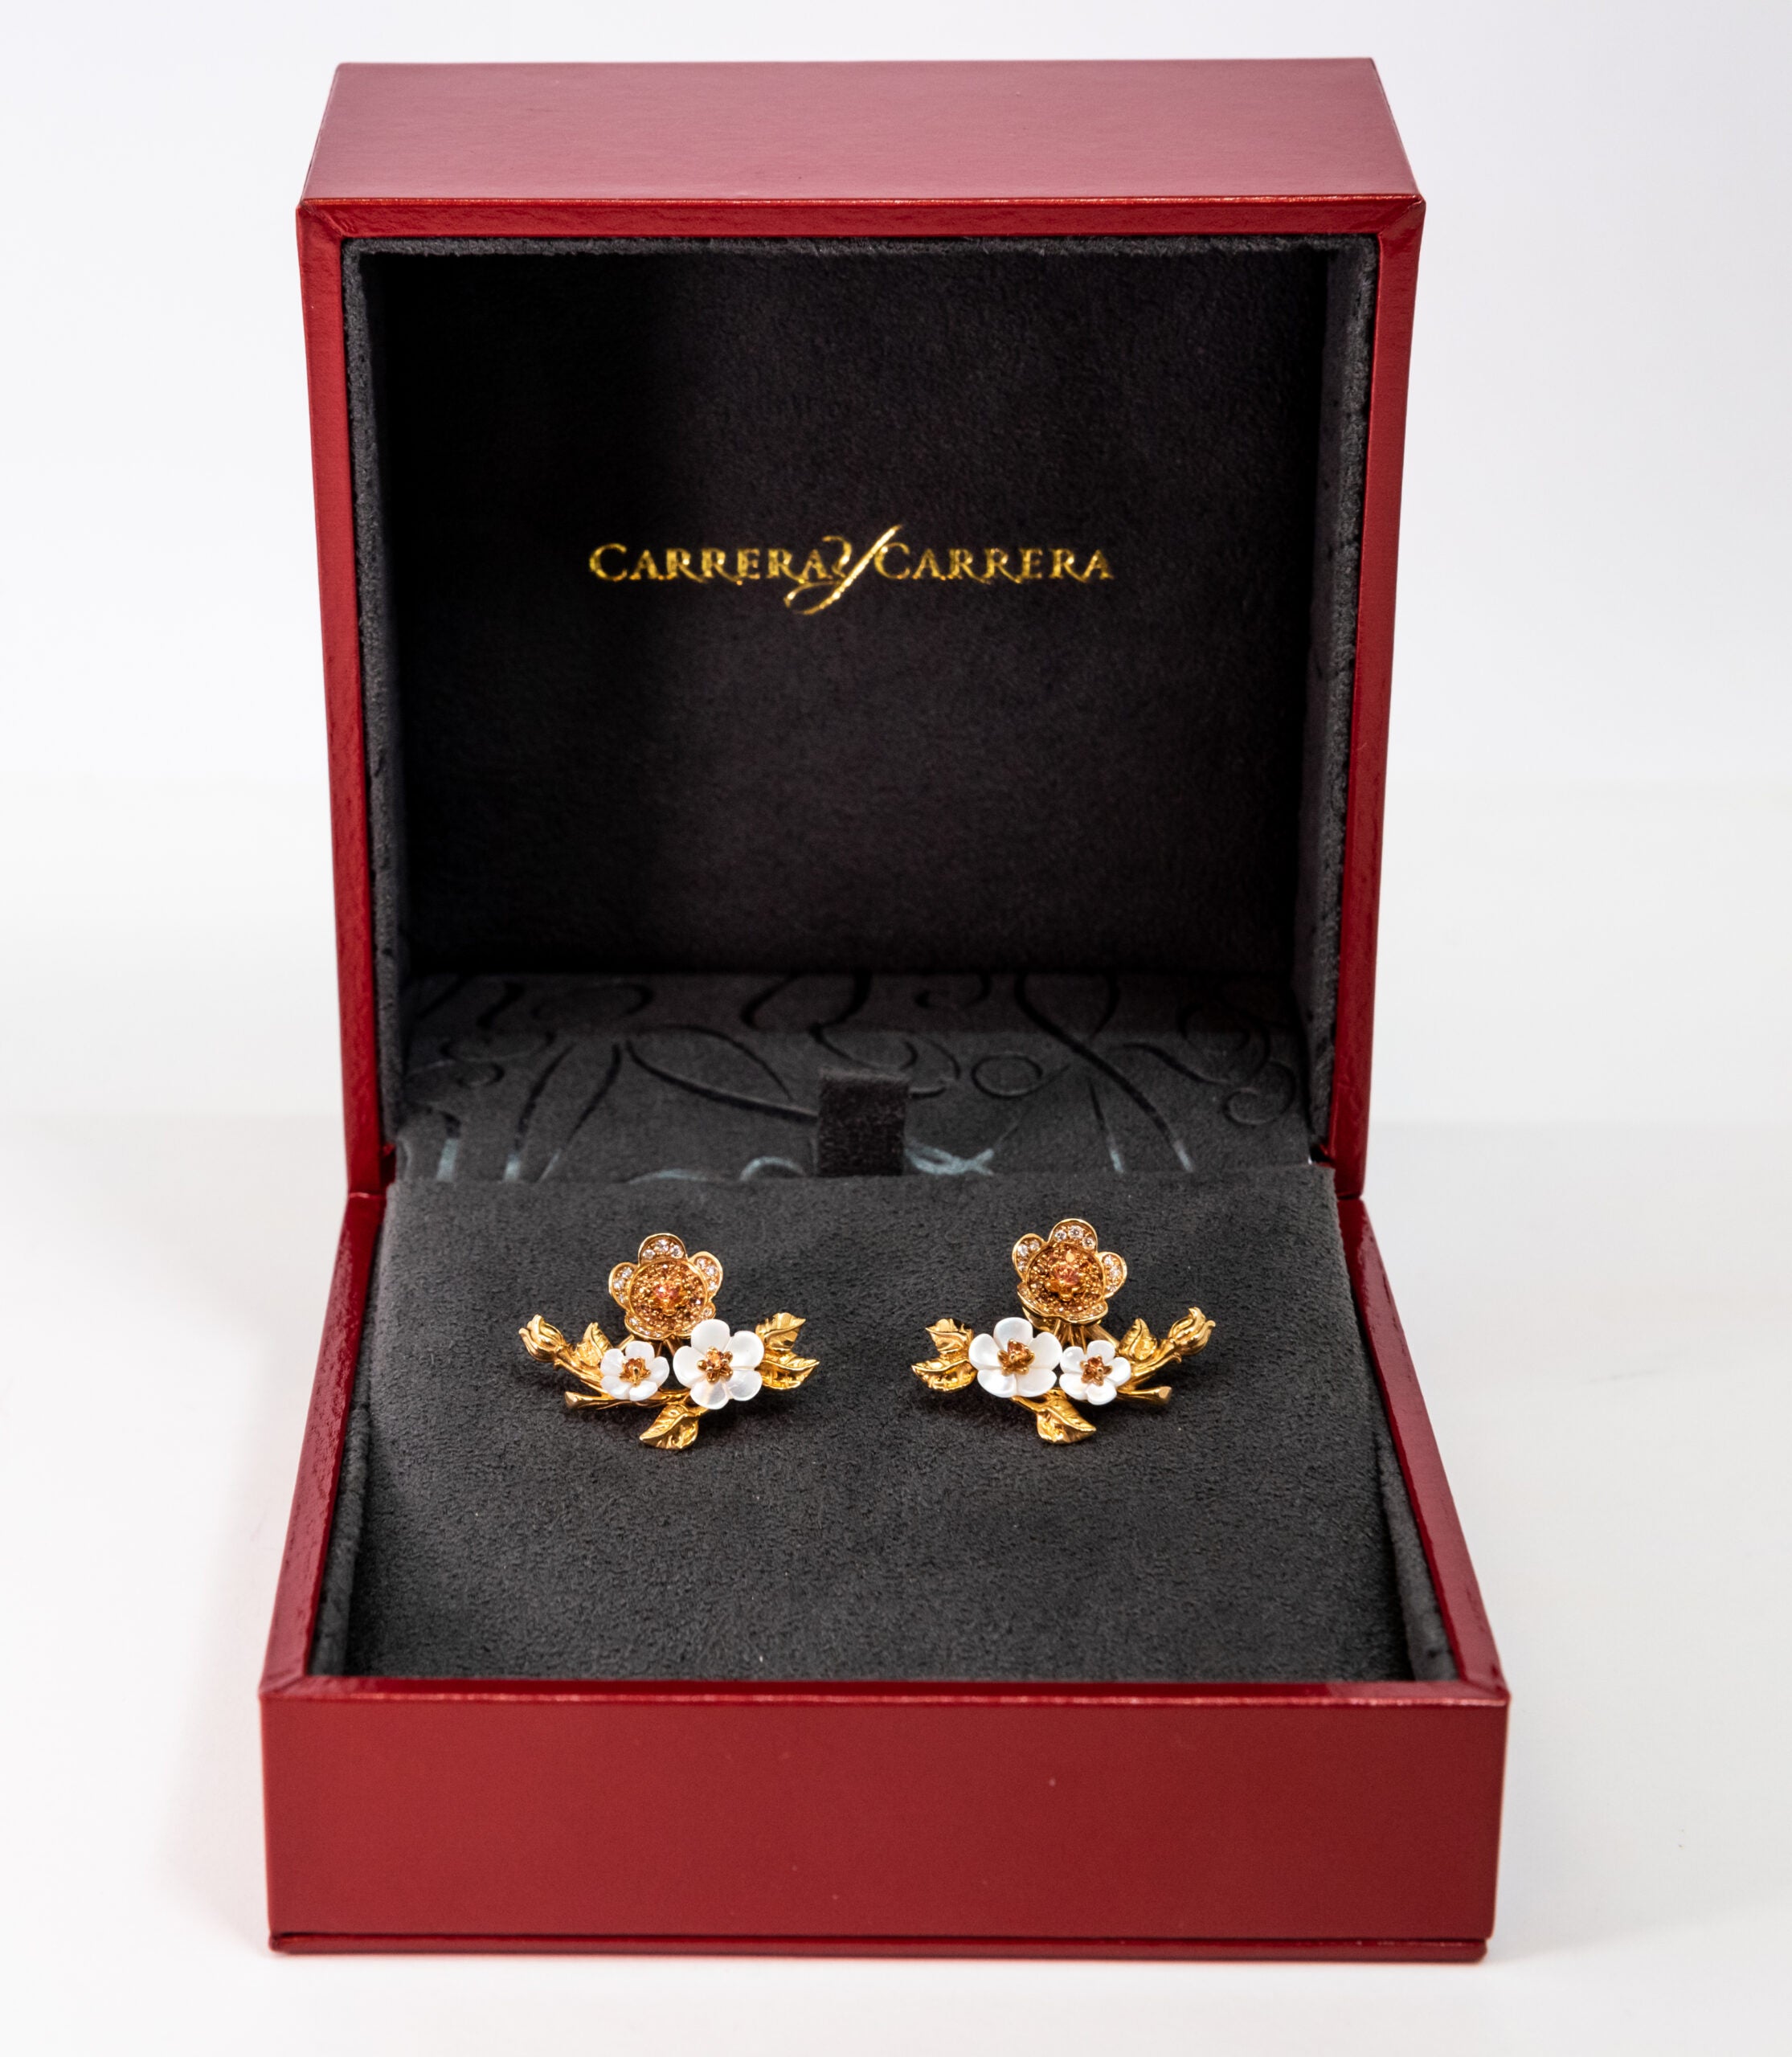 Carrera Y Carrera Cerezo 3 Flower 18K Yellow Gold Mother of Pearl and Diamonds Earring